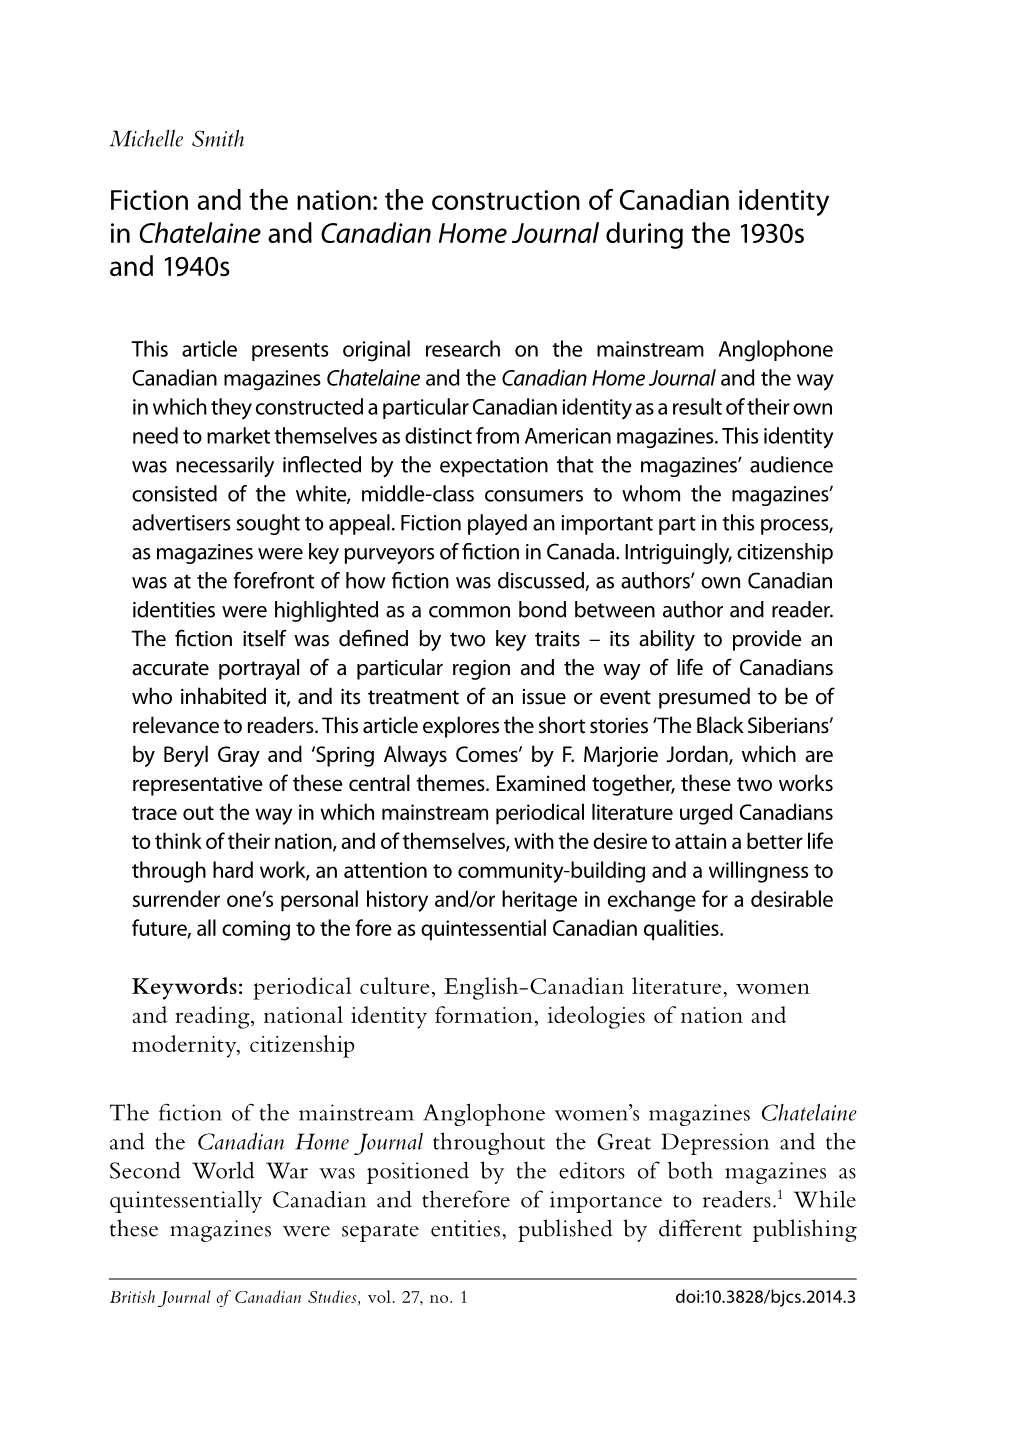 Fiction and the Nation: the Construction of Canadian Identity in Chatelaine and Canadian Home Journal During the 1930S and 1940S